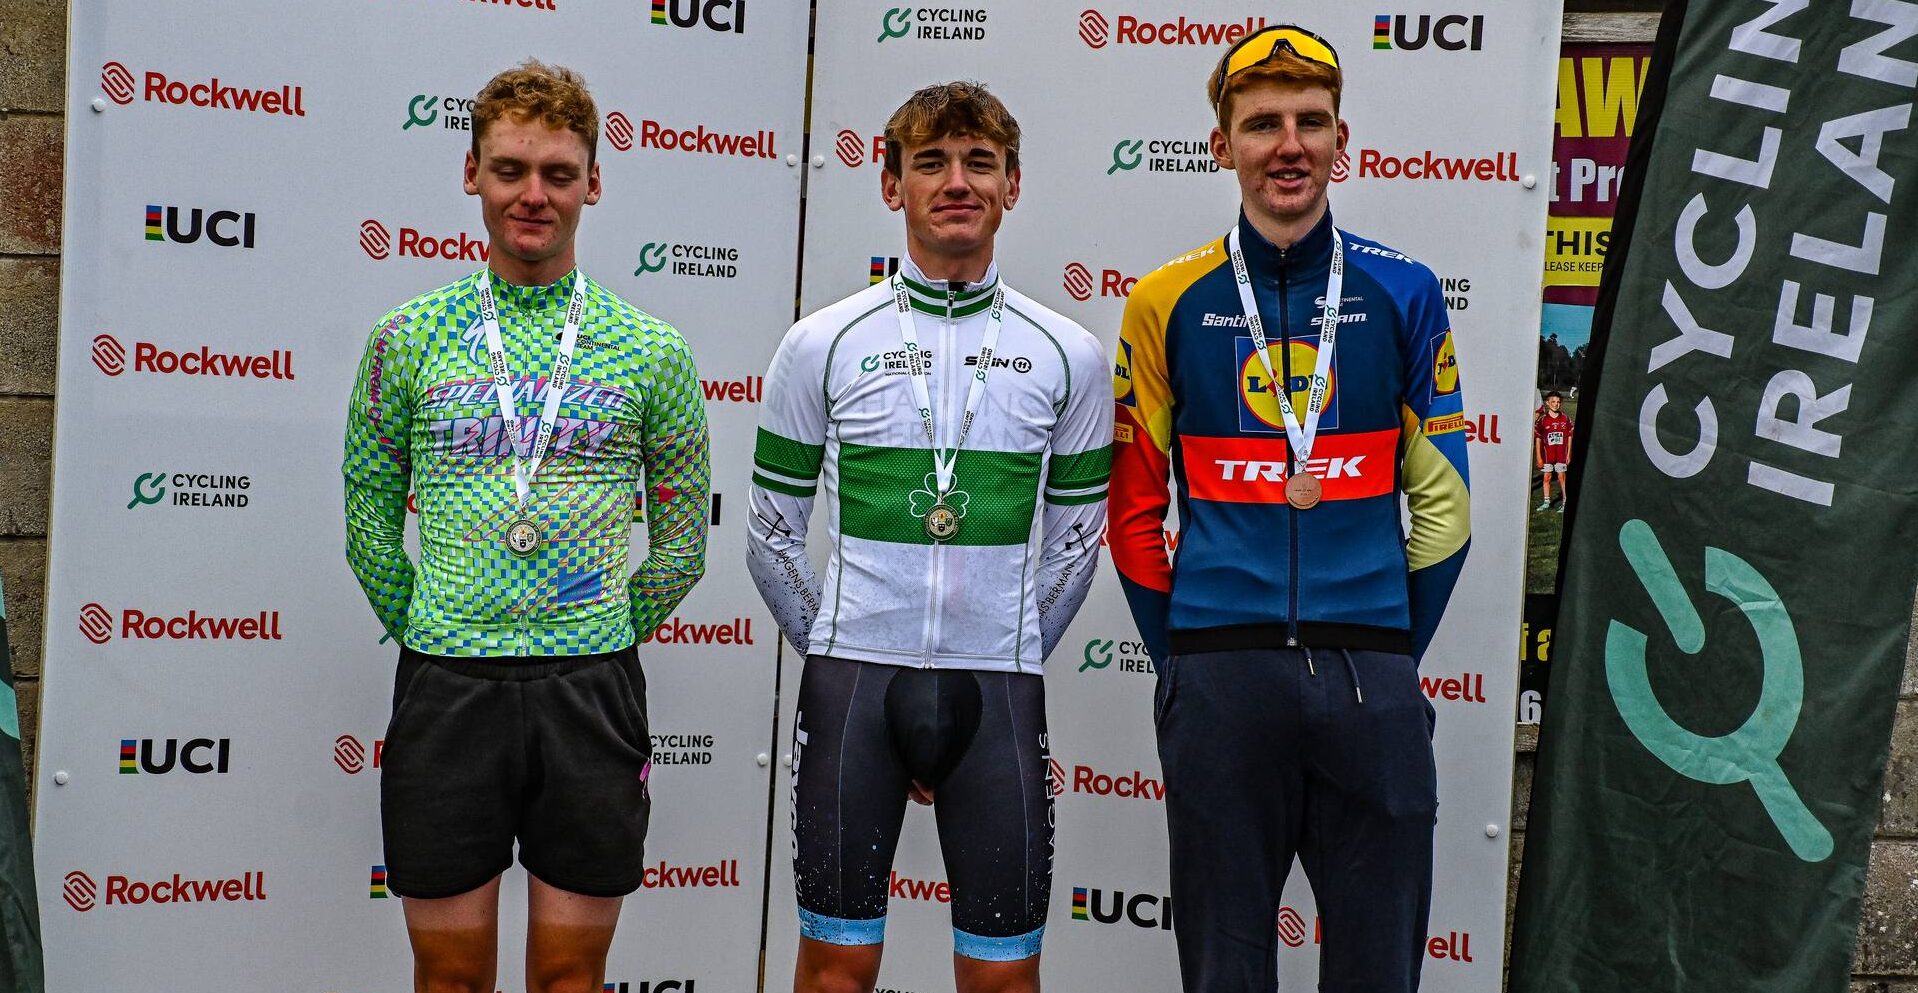 Adam Rafferty from exam hall to top of podium | “It gives me confidence”